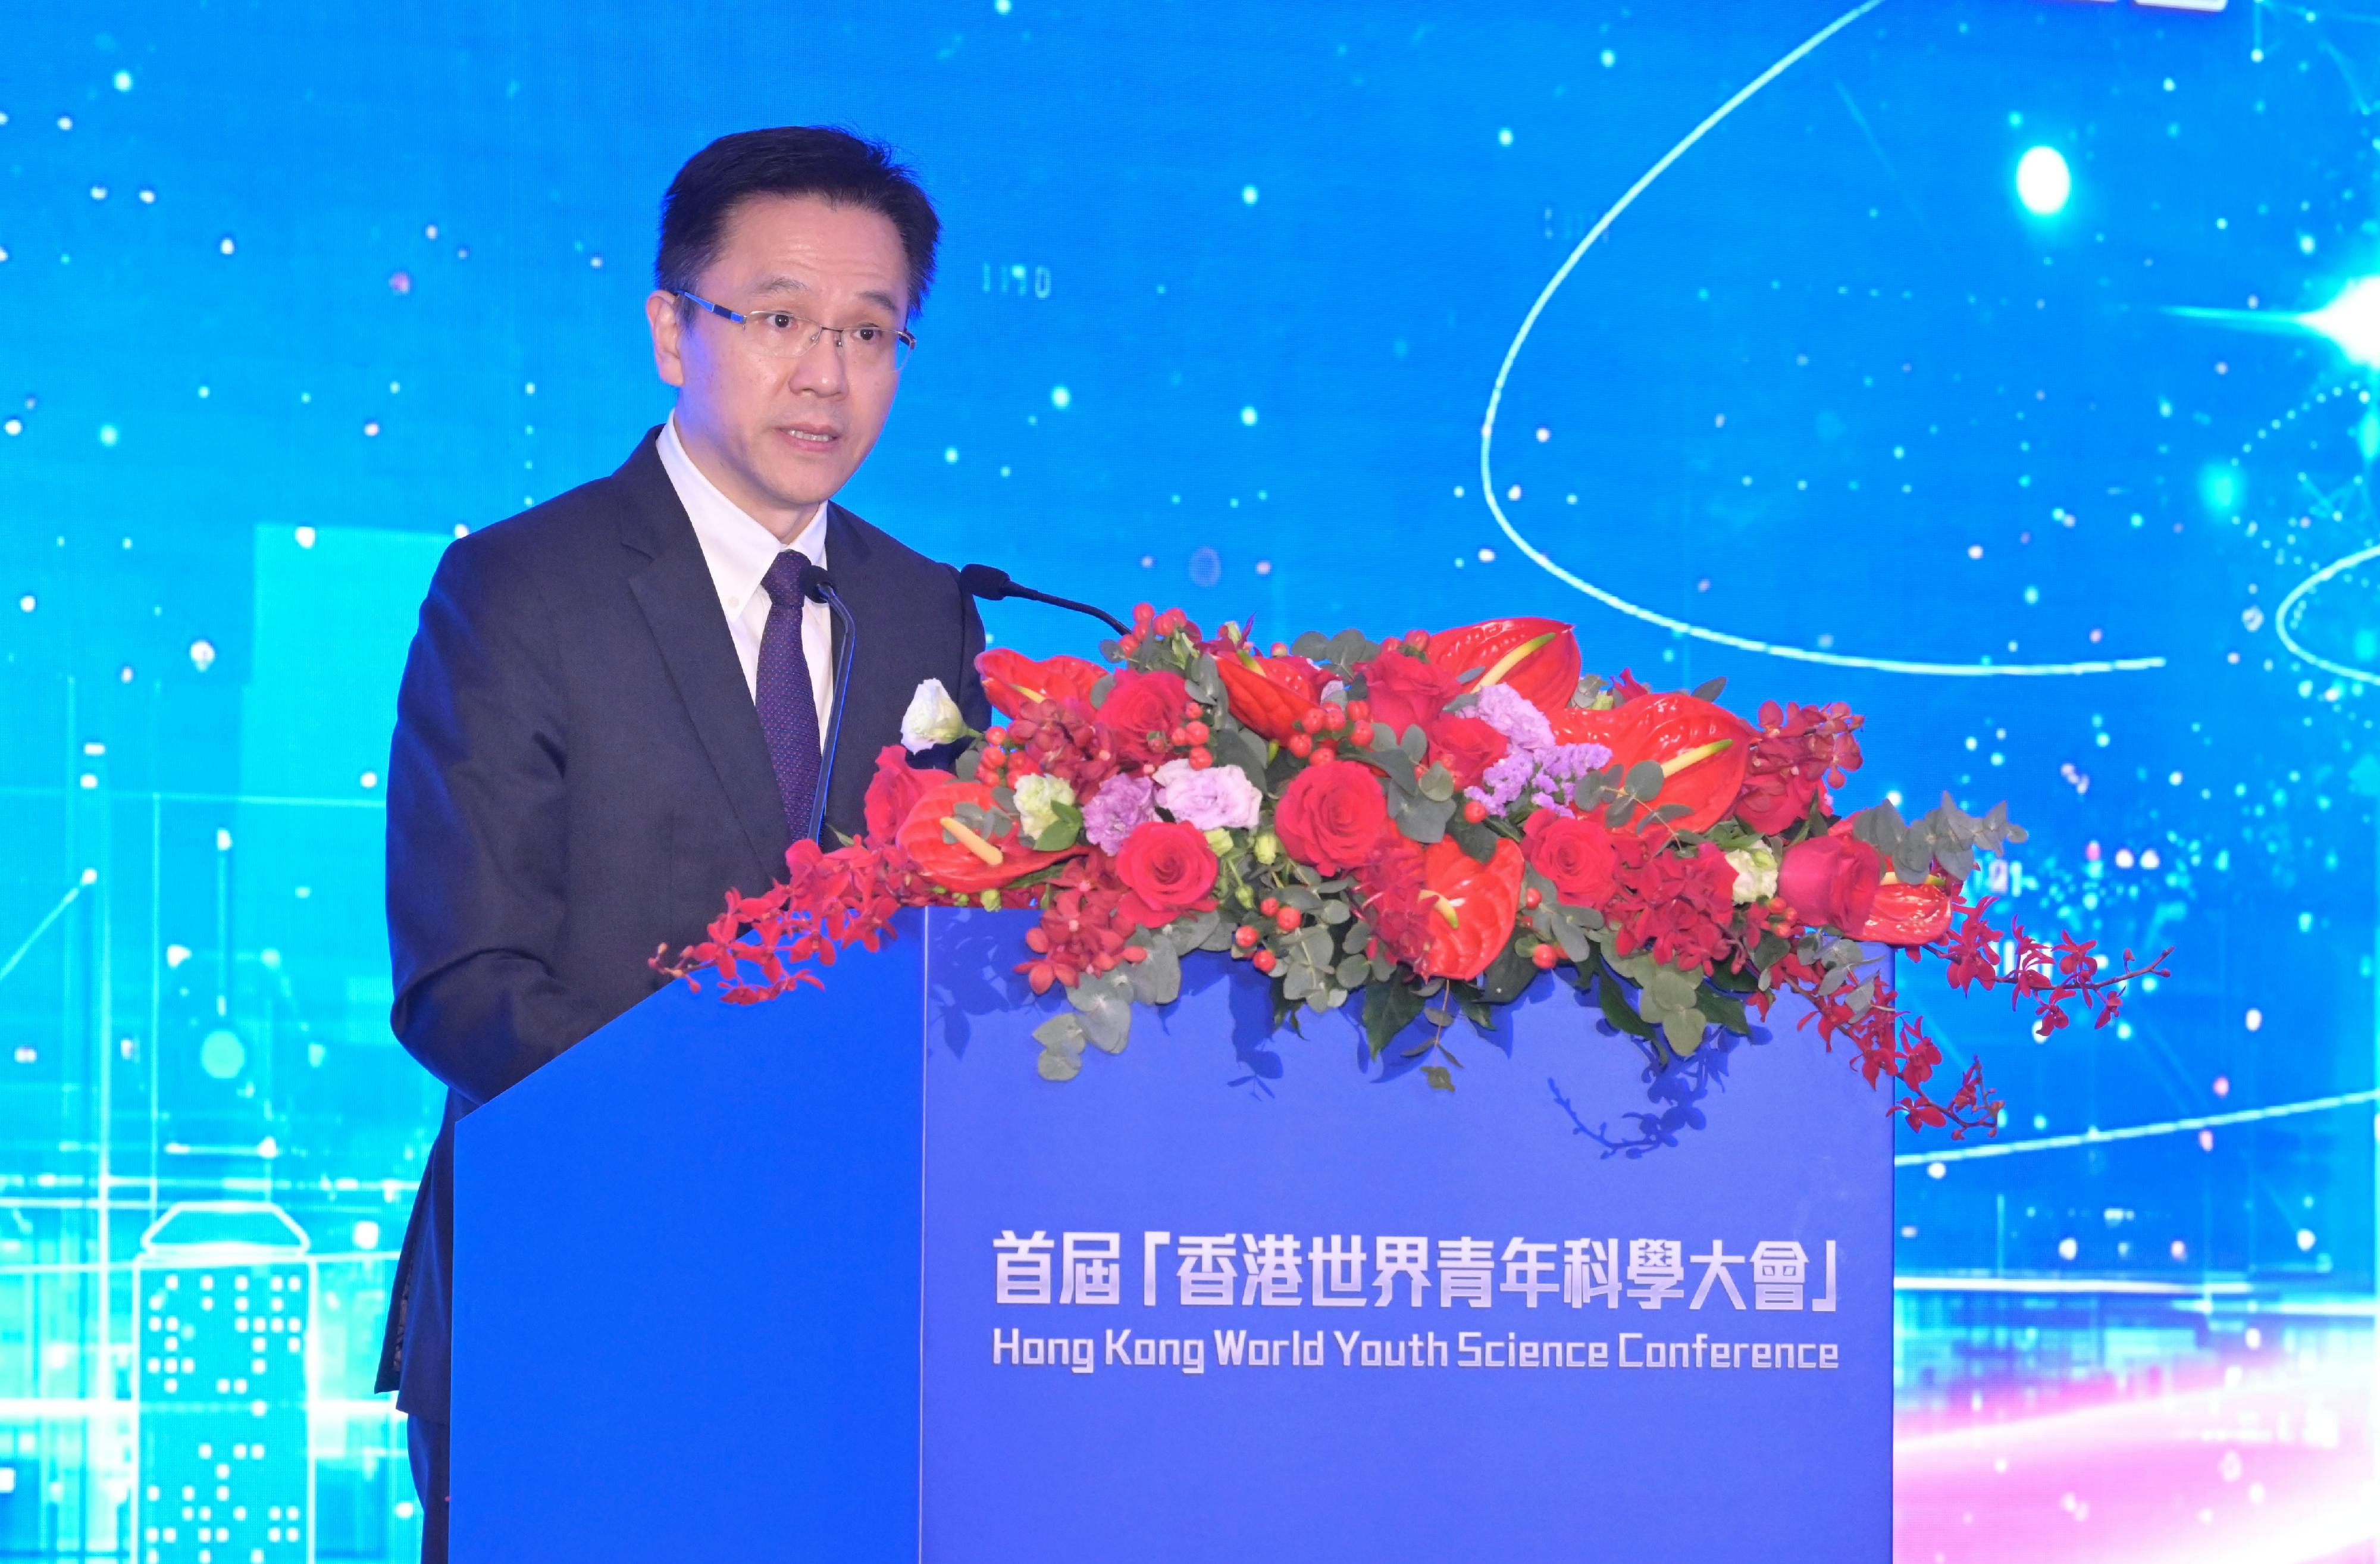 The Secretary for Innovation, Technology and Industry, Professor Sun Dong, speaks at the Hong Kong World Youth Science Conference today (April 13).